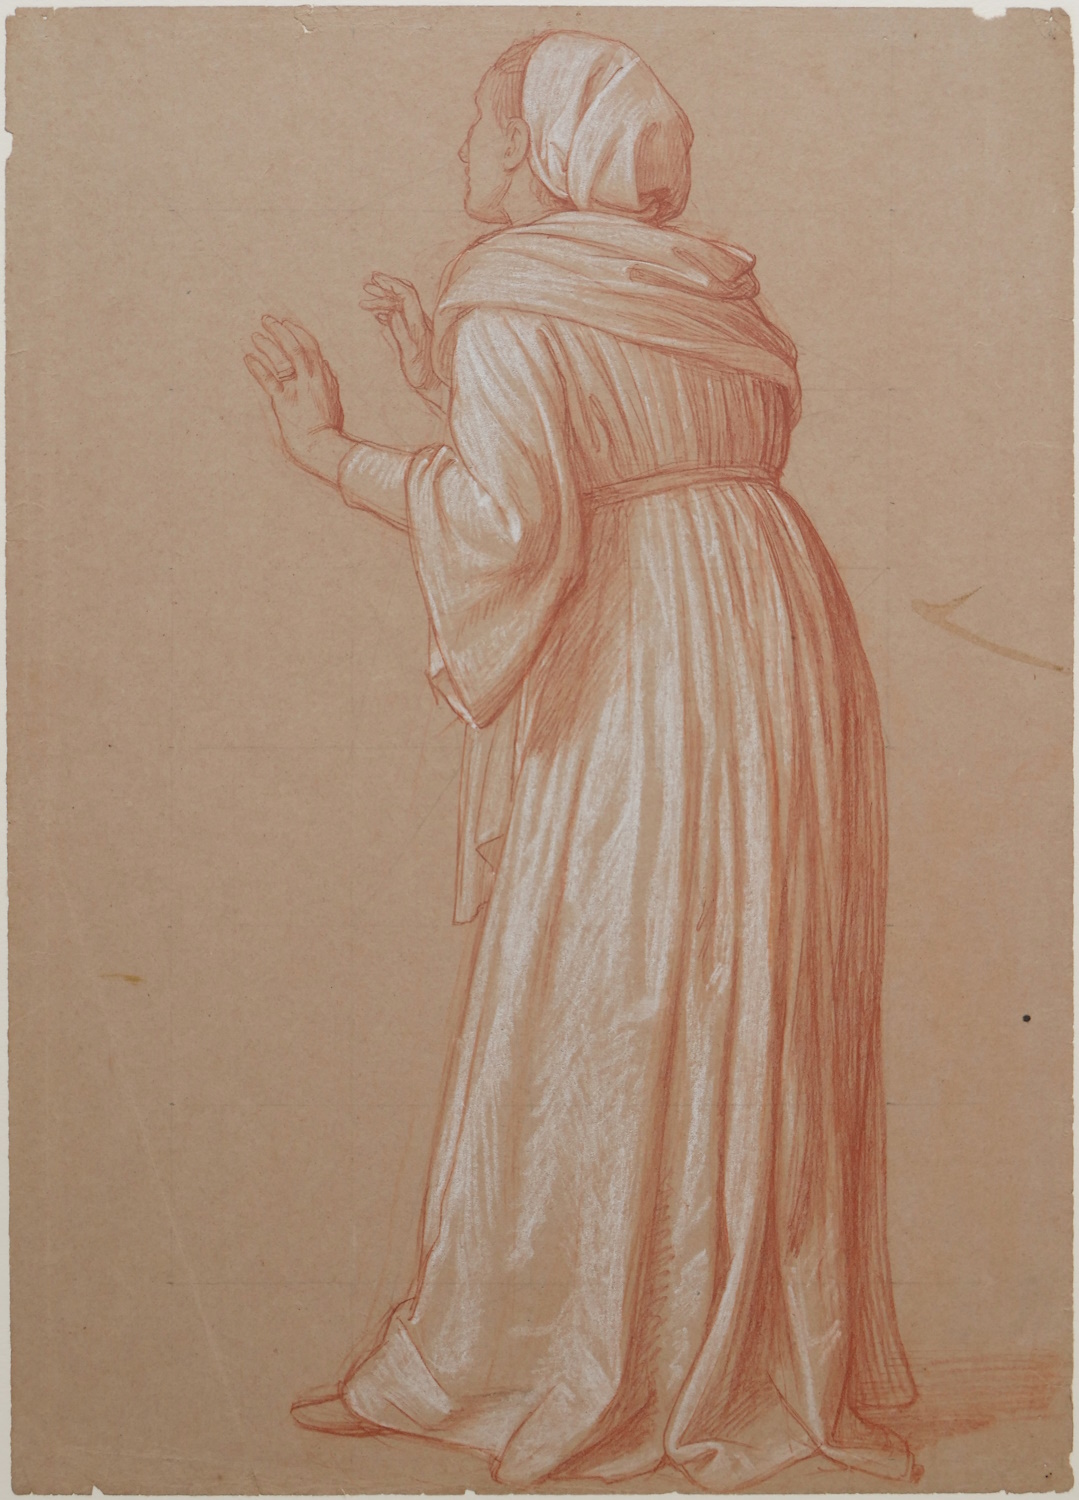 European School c.1860 – Study of a Woman with Both Arms Raised